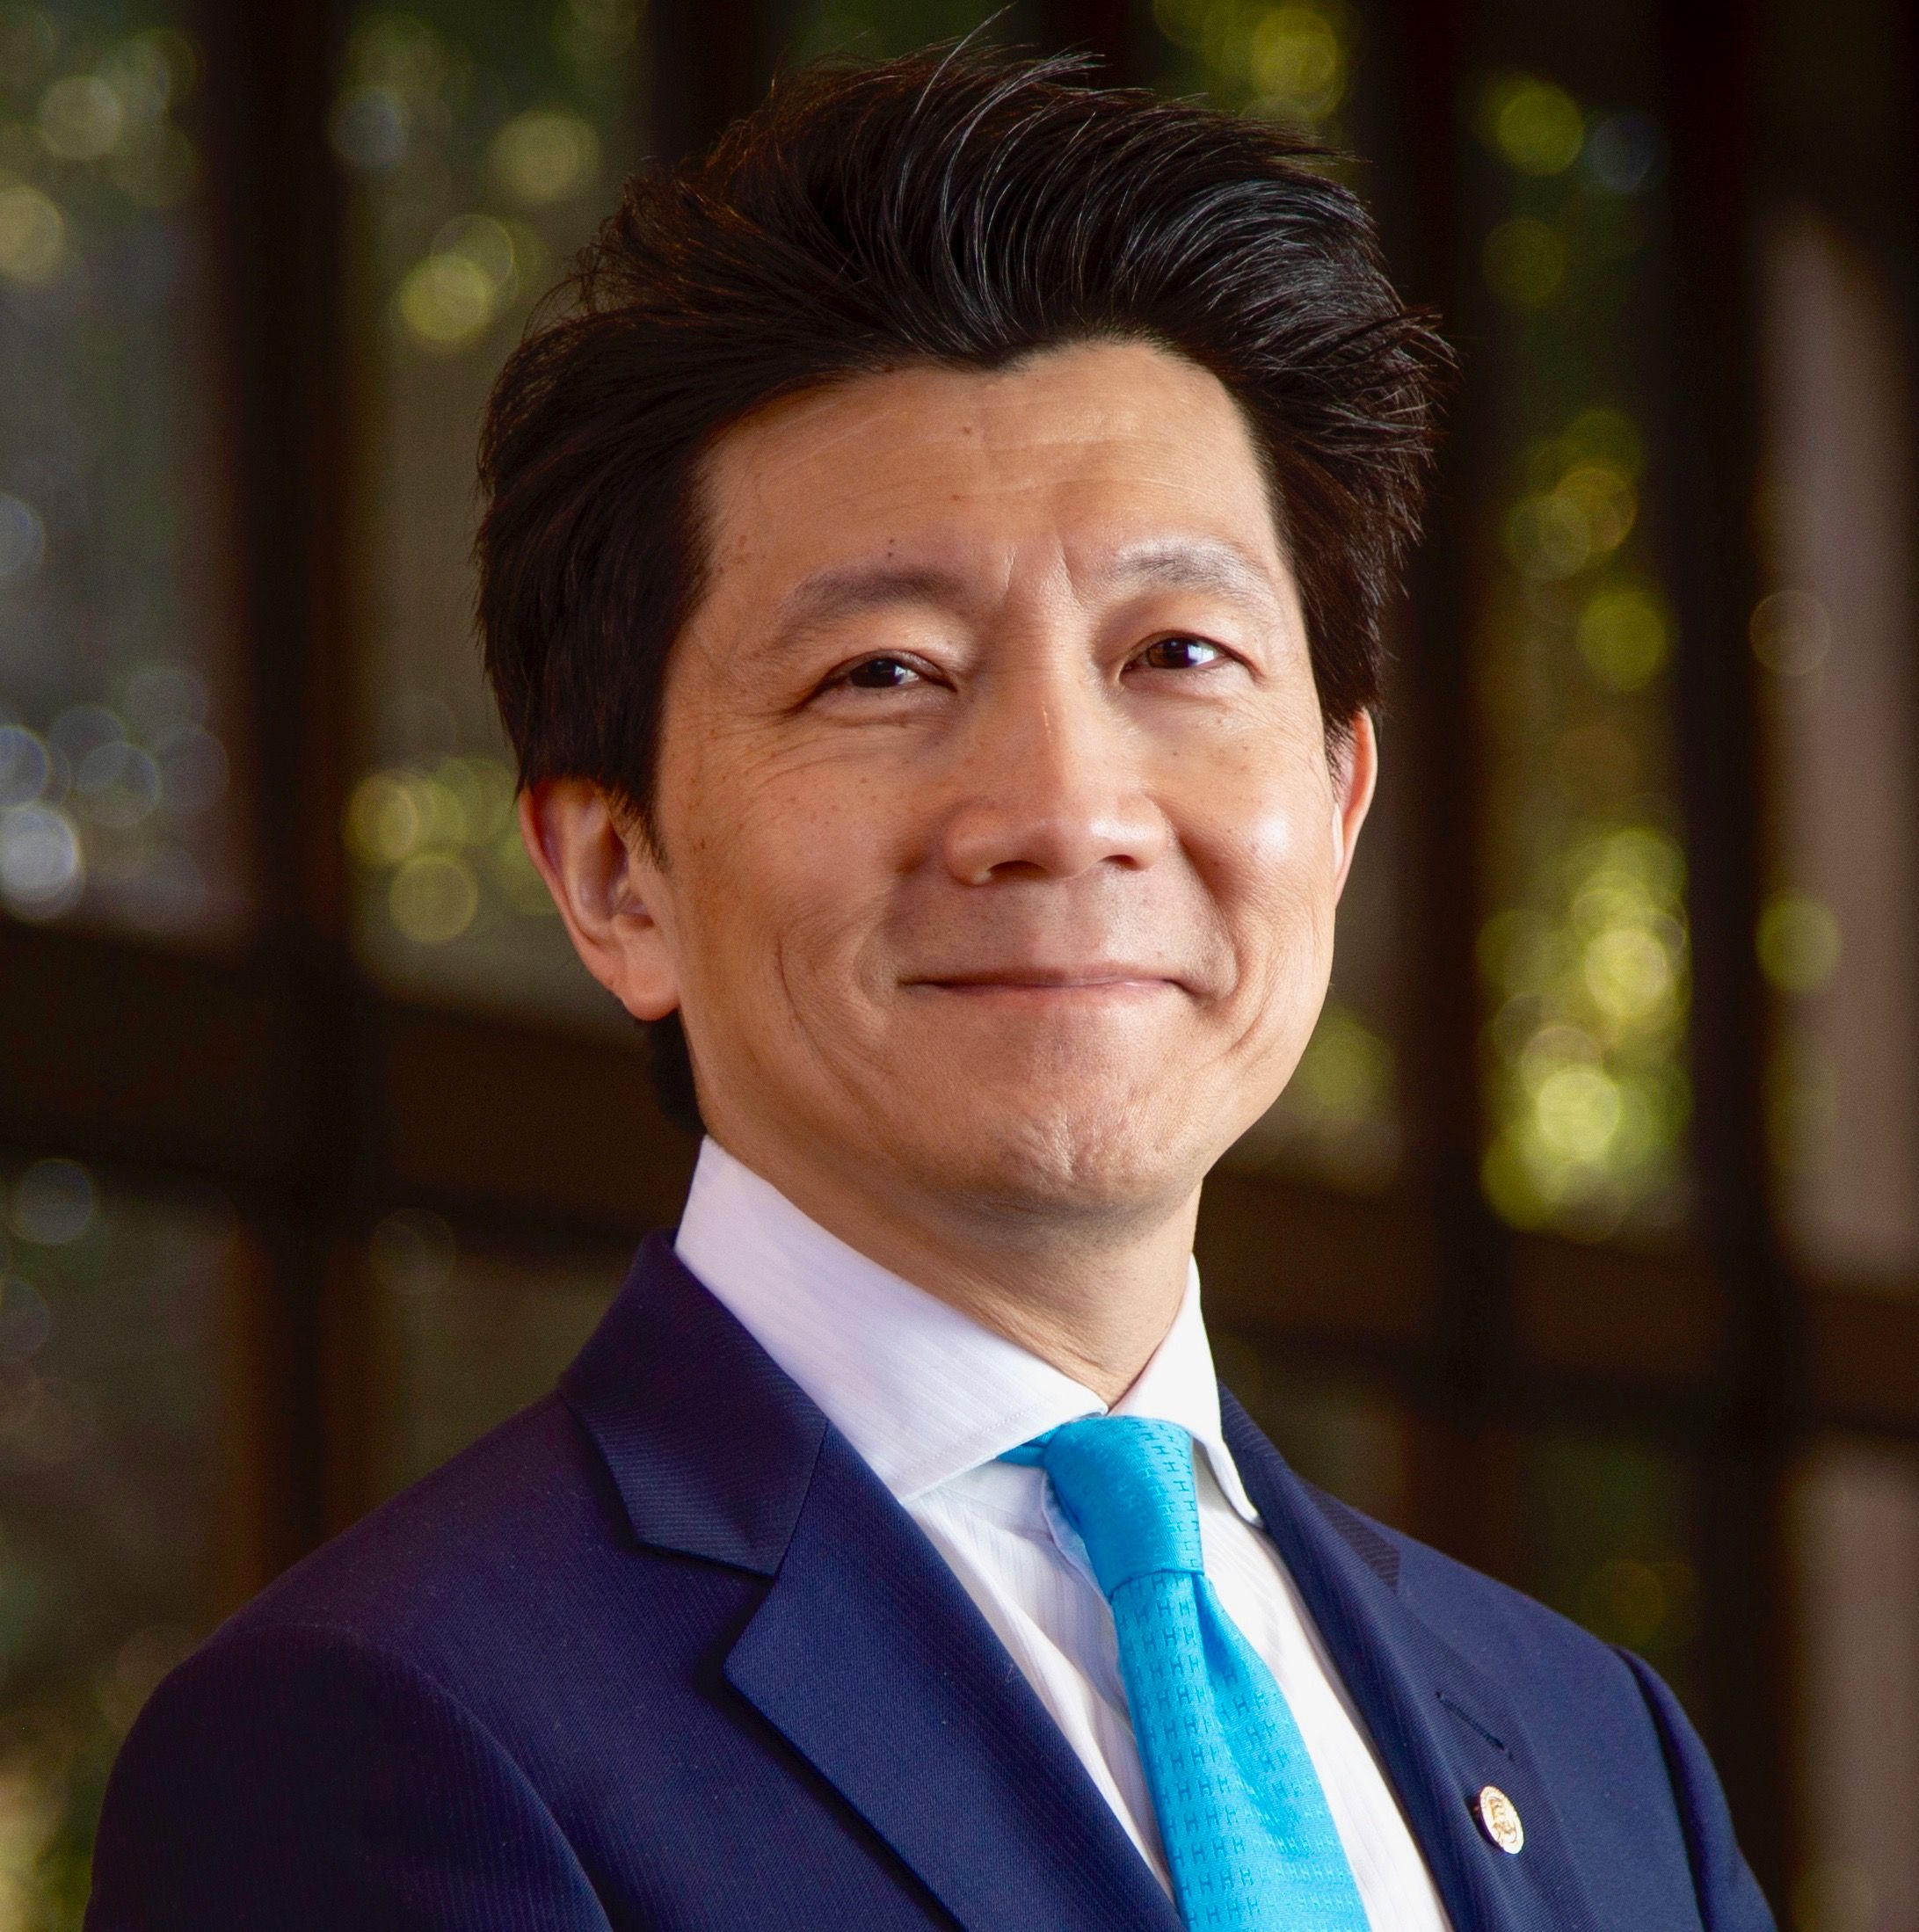 Q&A with W.P. Andrew Lee, M.D. for Planning Matters Spring 2021.